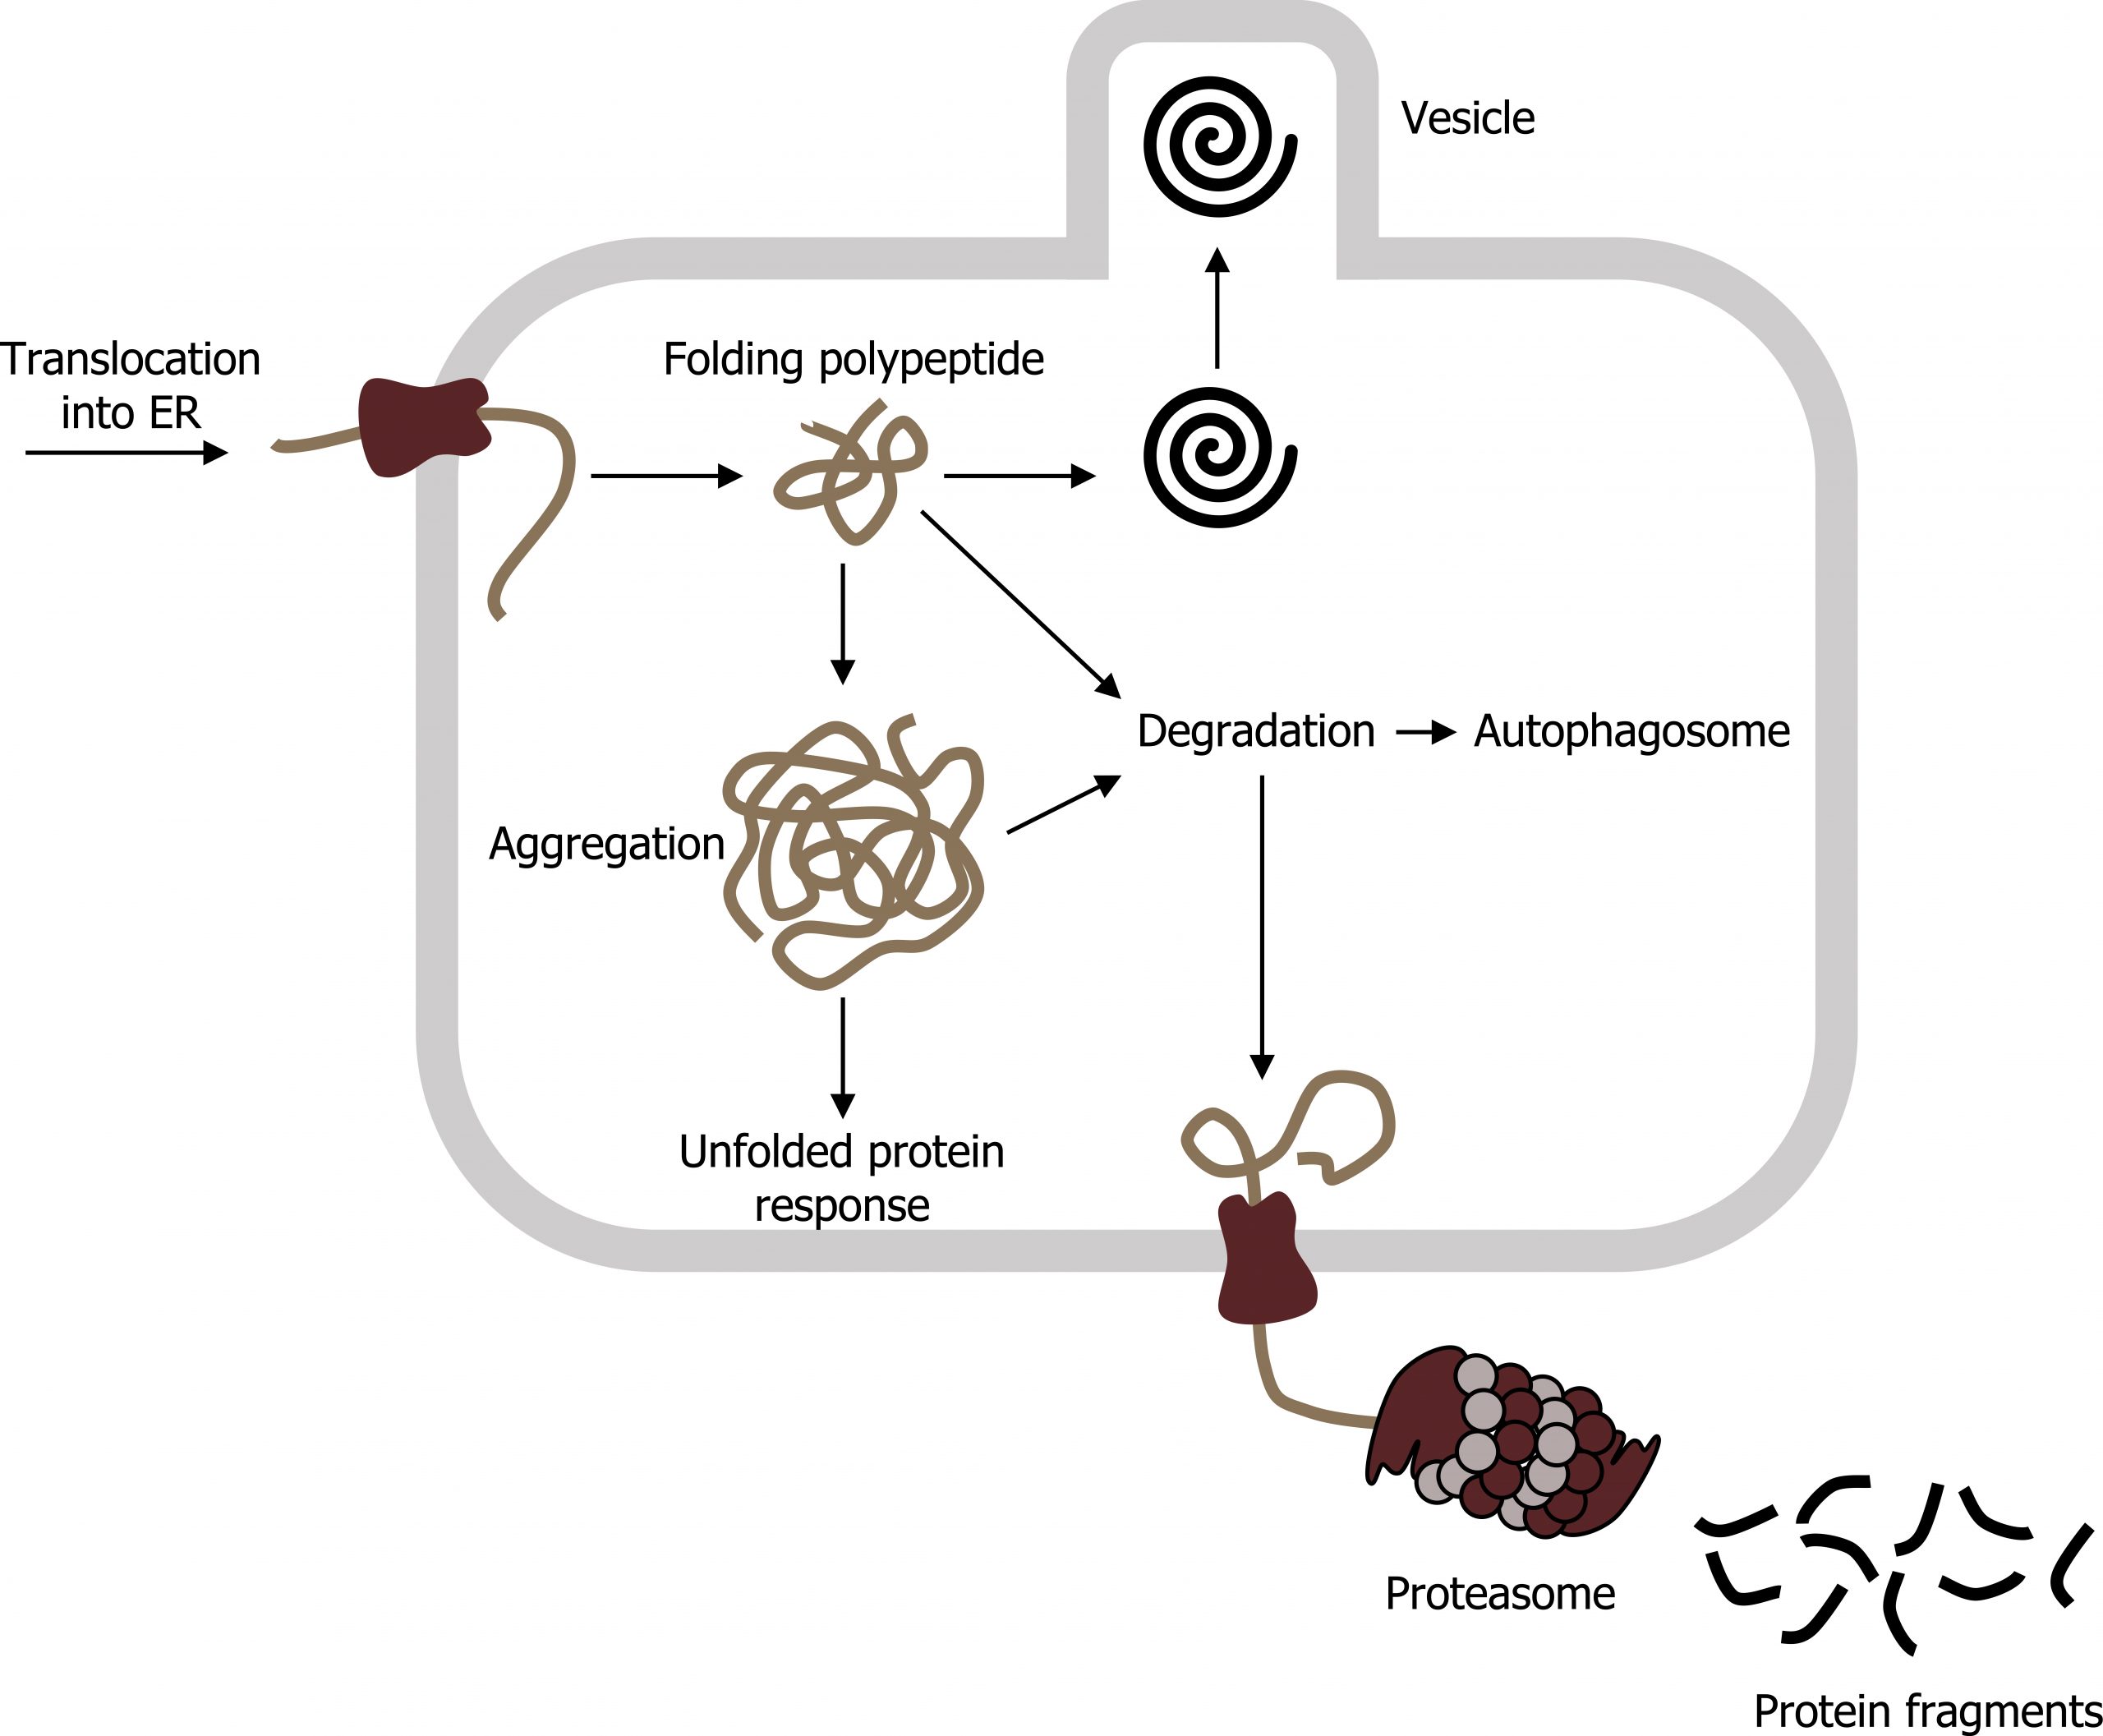 Translocation of protein with chaperone into the ER arrow folding polypeptide arrows to vesicle, aggregation, and degradation. Aggregation arrows unfolded protein response and degradation. Degradation arrow autophagosome. Degradation arrow to proteasome resulting in protein fragments outside of the ER.